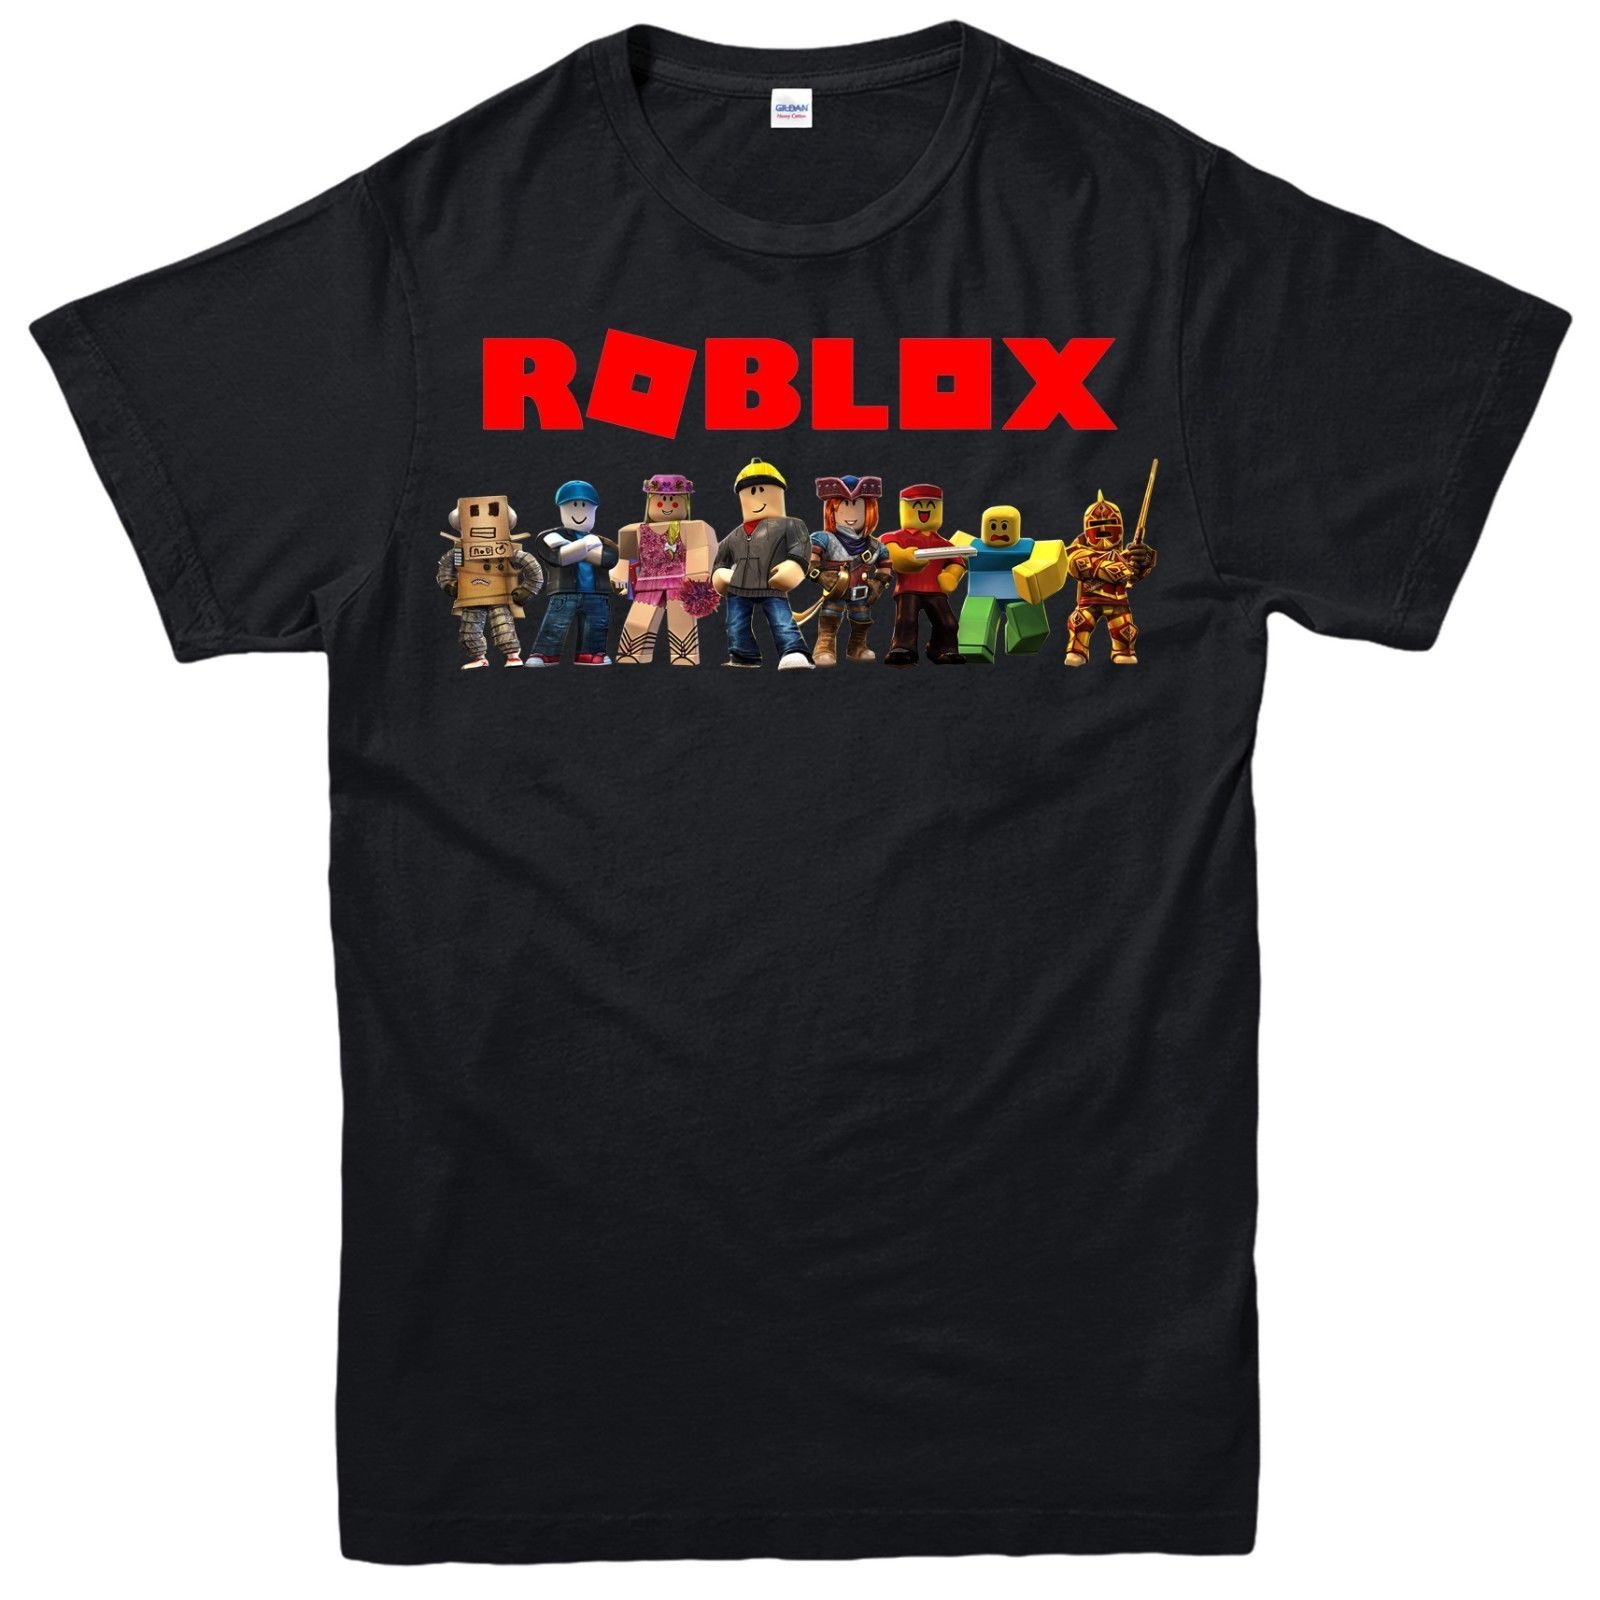 Roblox T Shirt Adidas Nils Stucki Kieferorthopäde - details about new way 922 youth hoodie roblox logo game filled